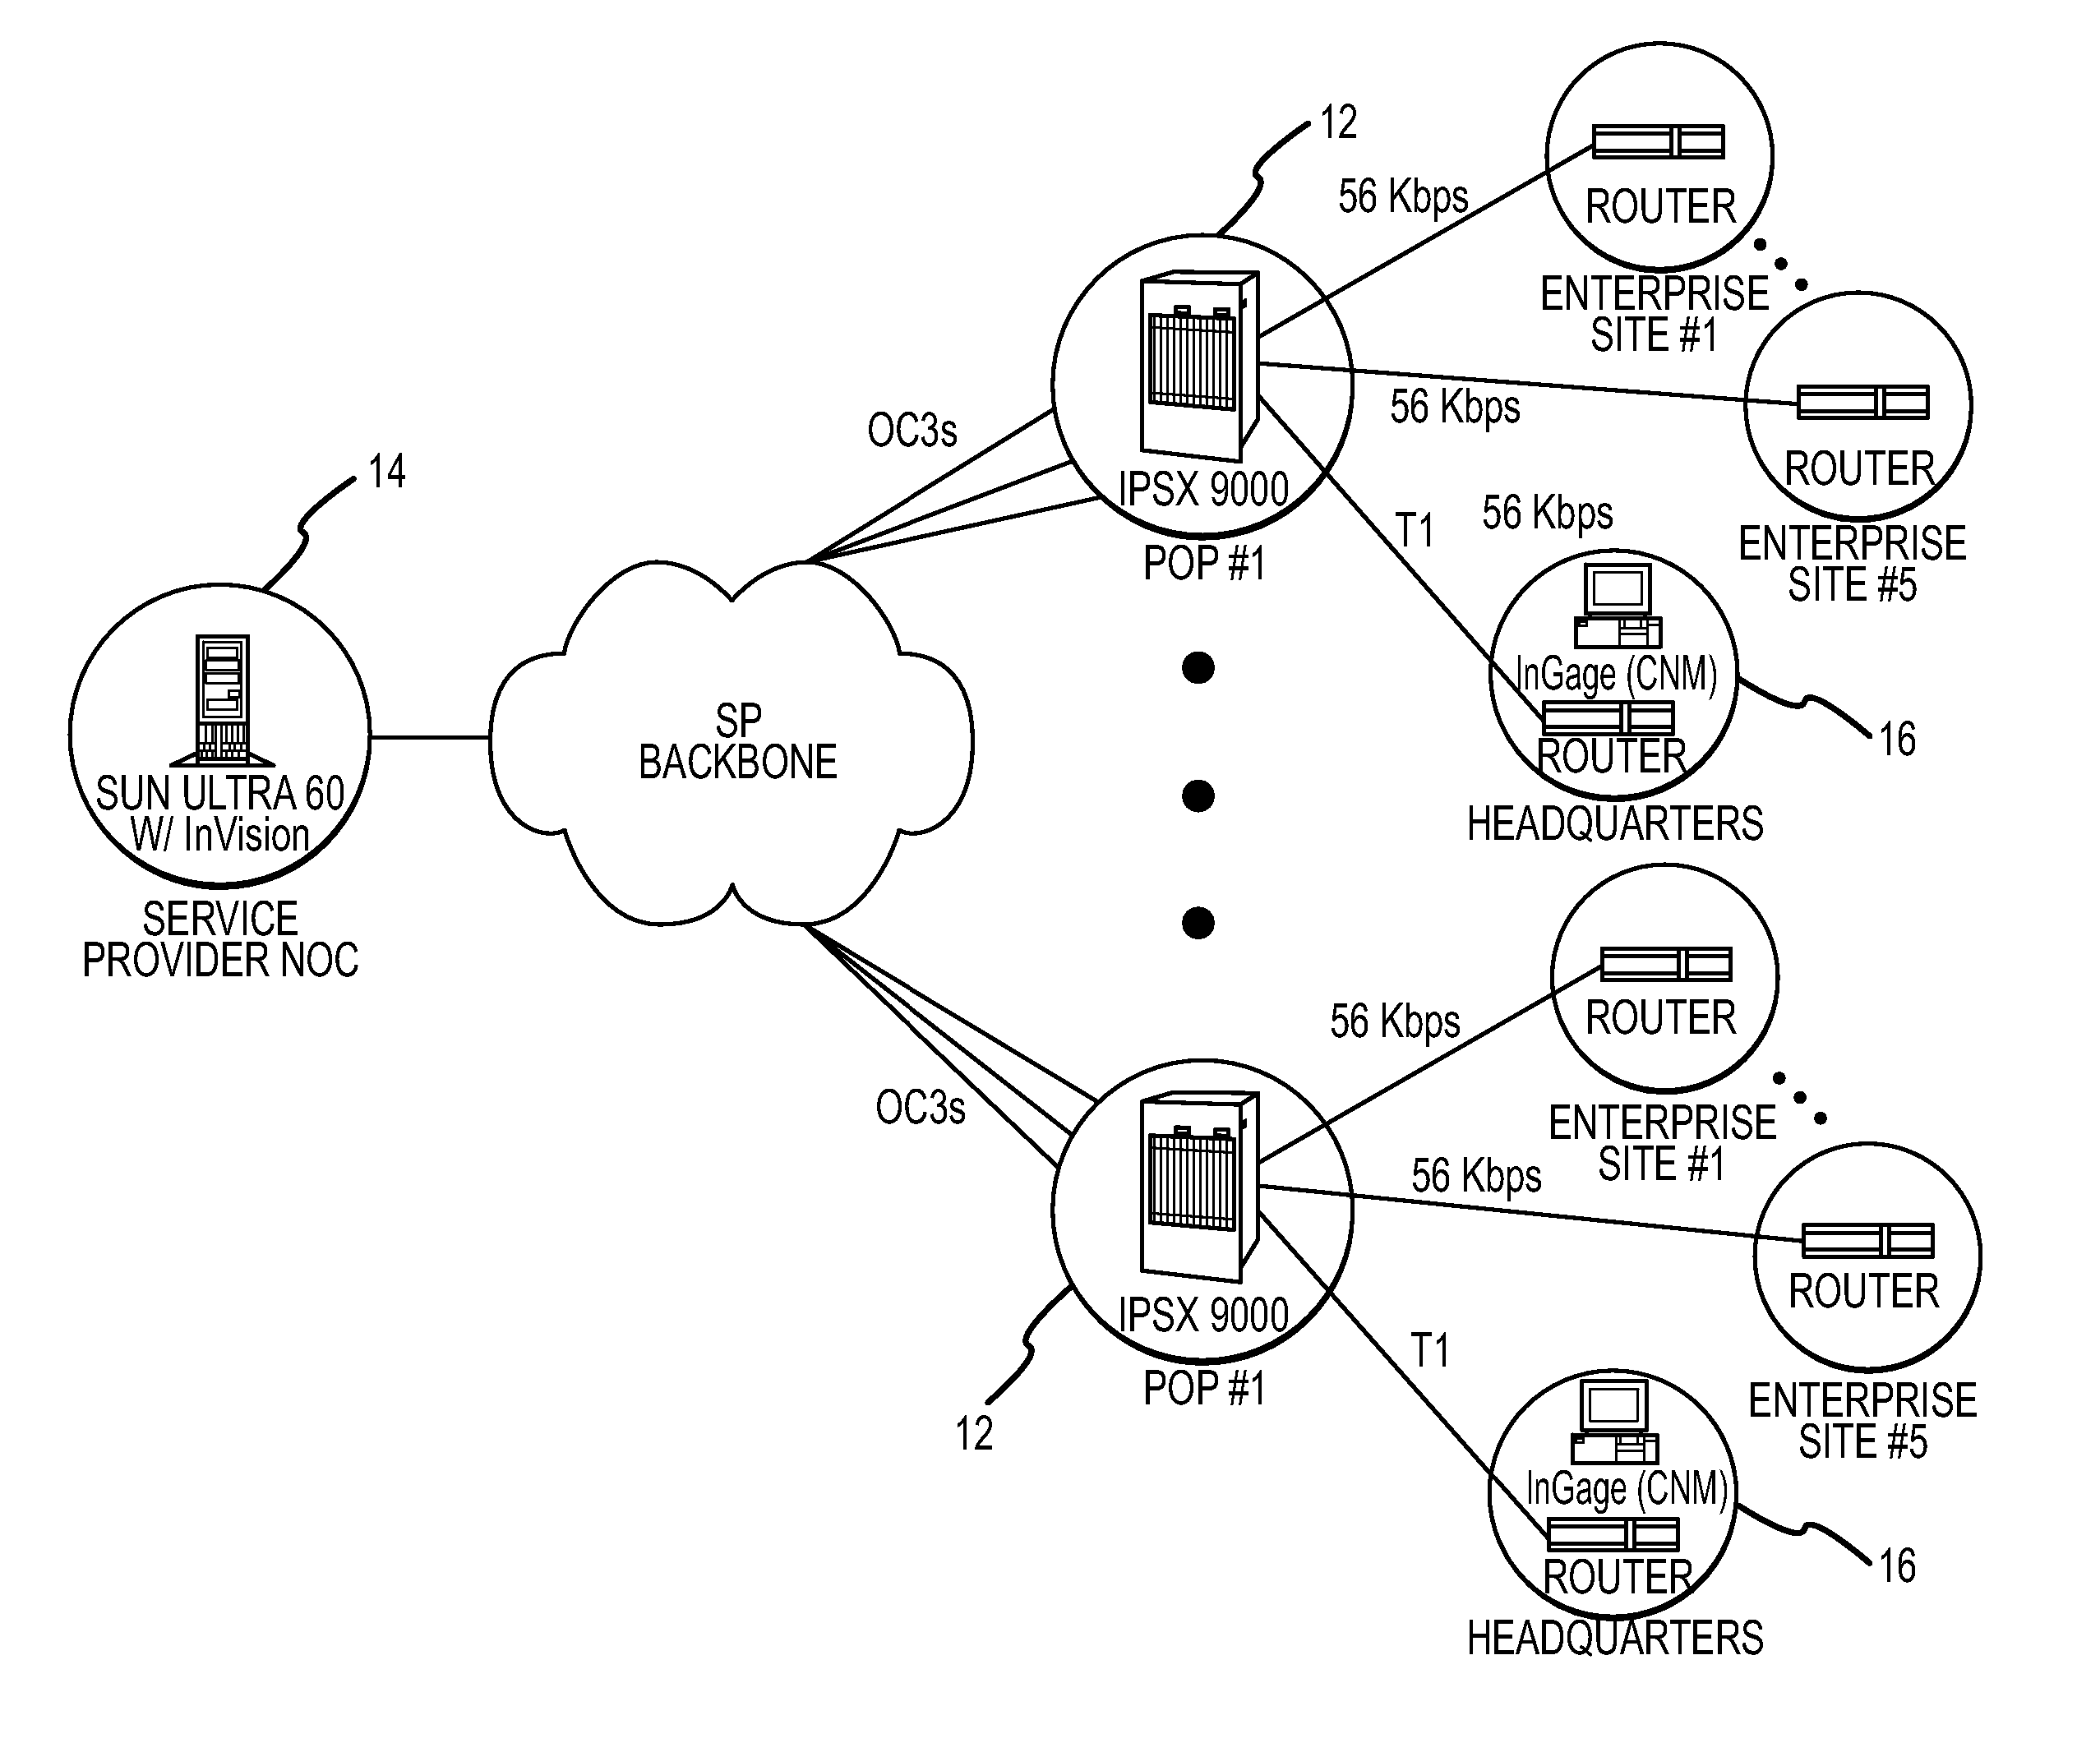 Synchronized backup of an object manager global database as part of a control blade redundancy service